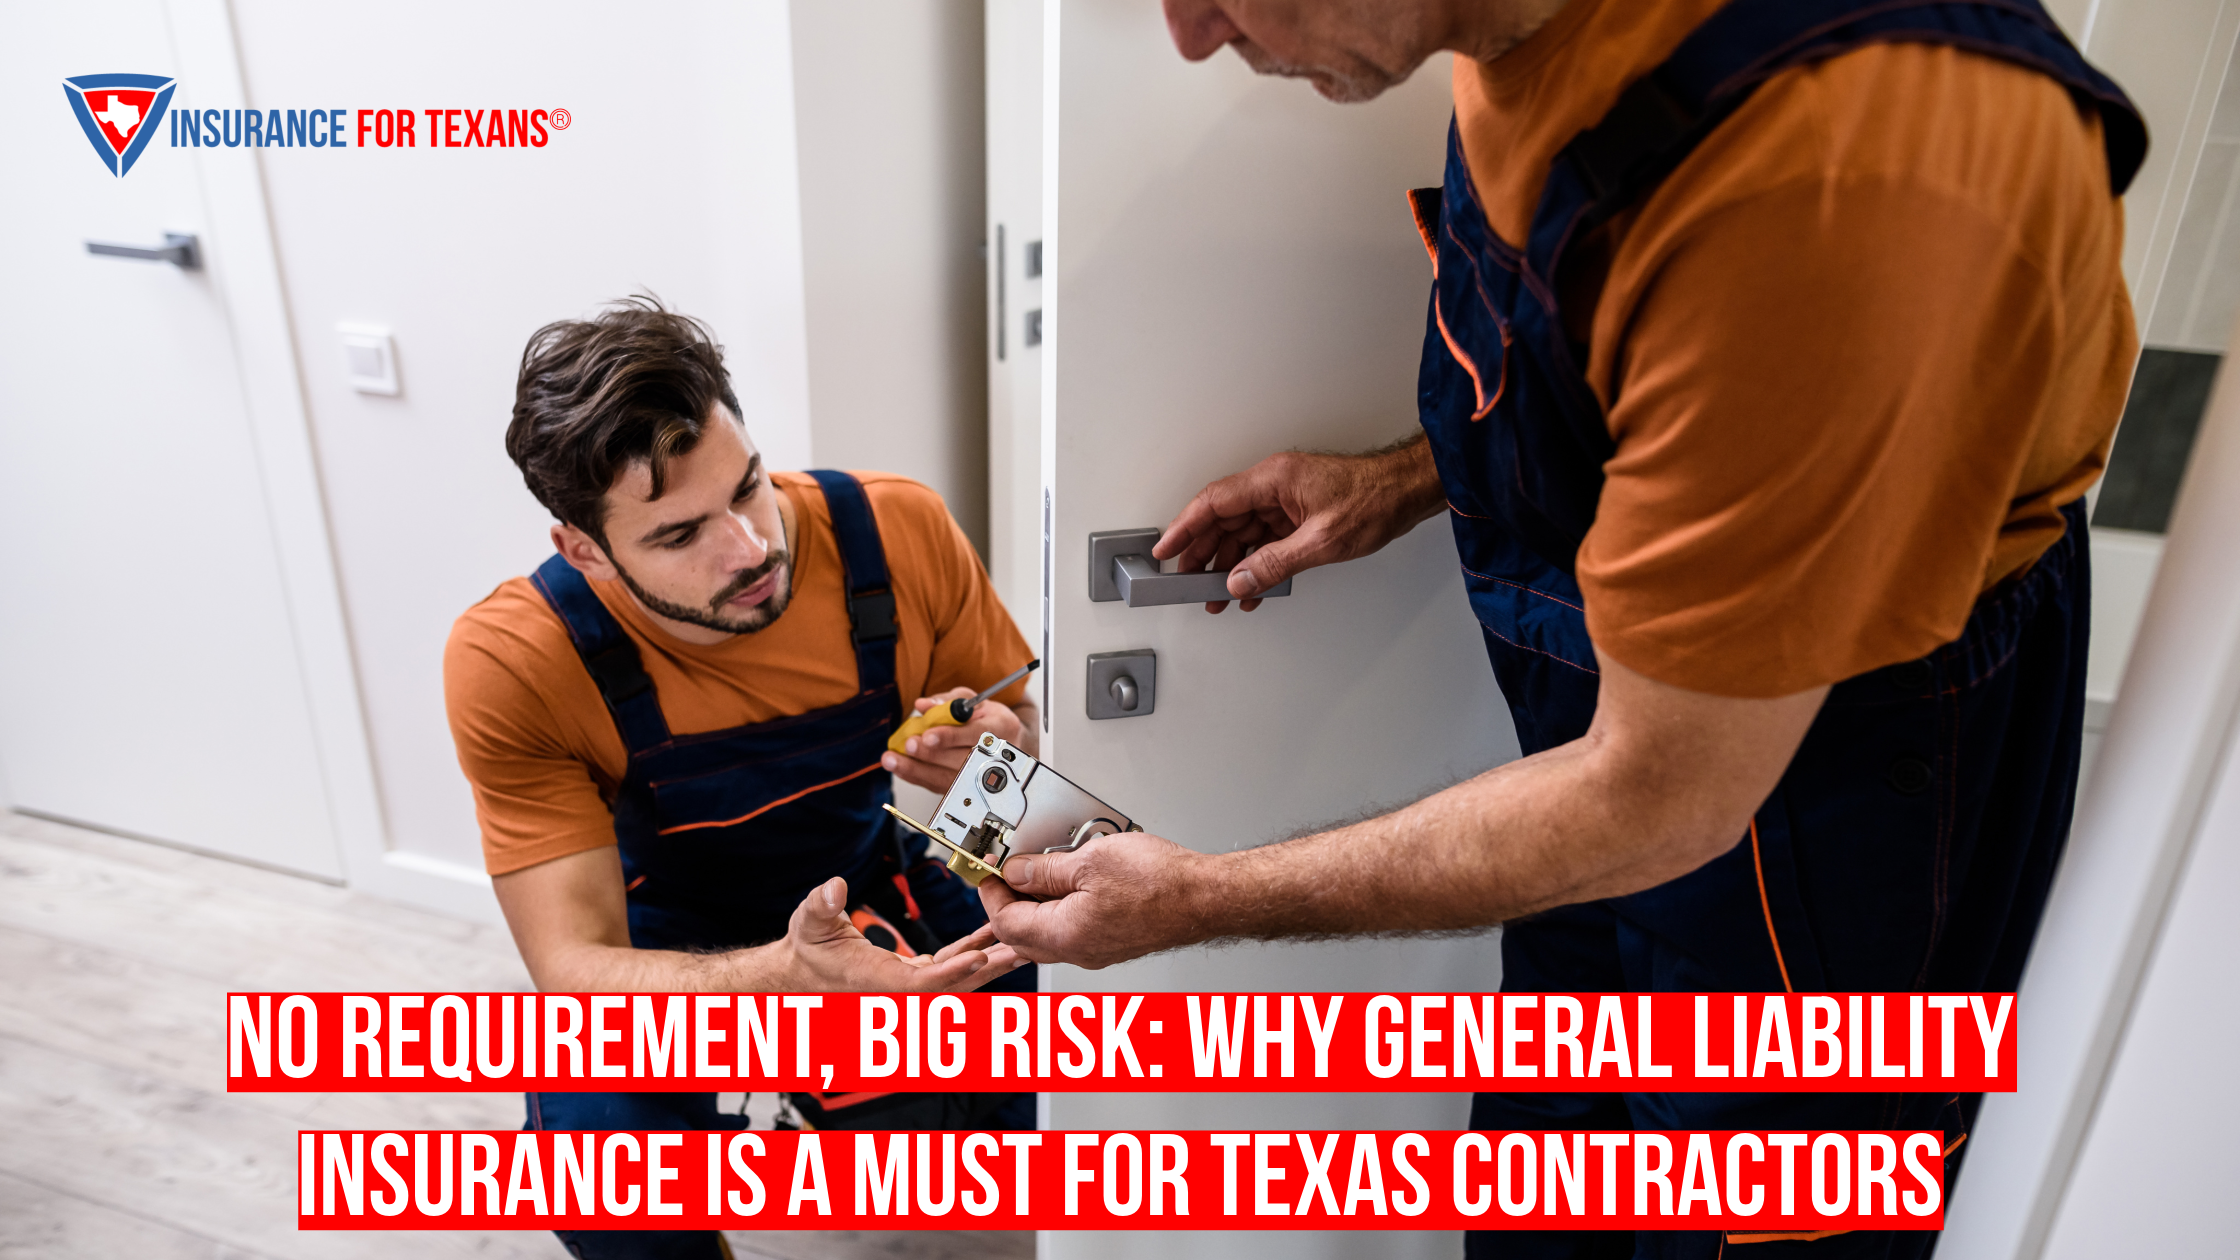 No Requirement, Big Risk: Why General Liability Insurance is a Must for Texas Contractors